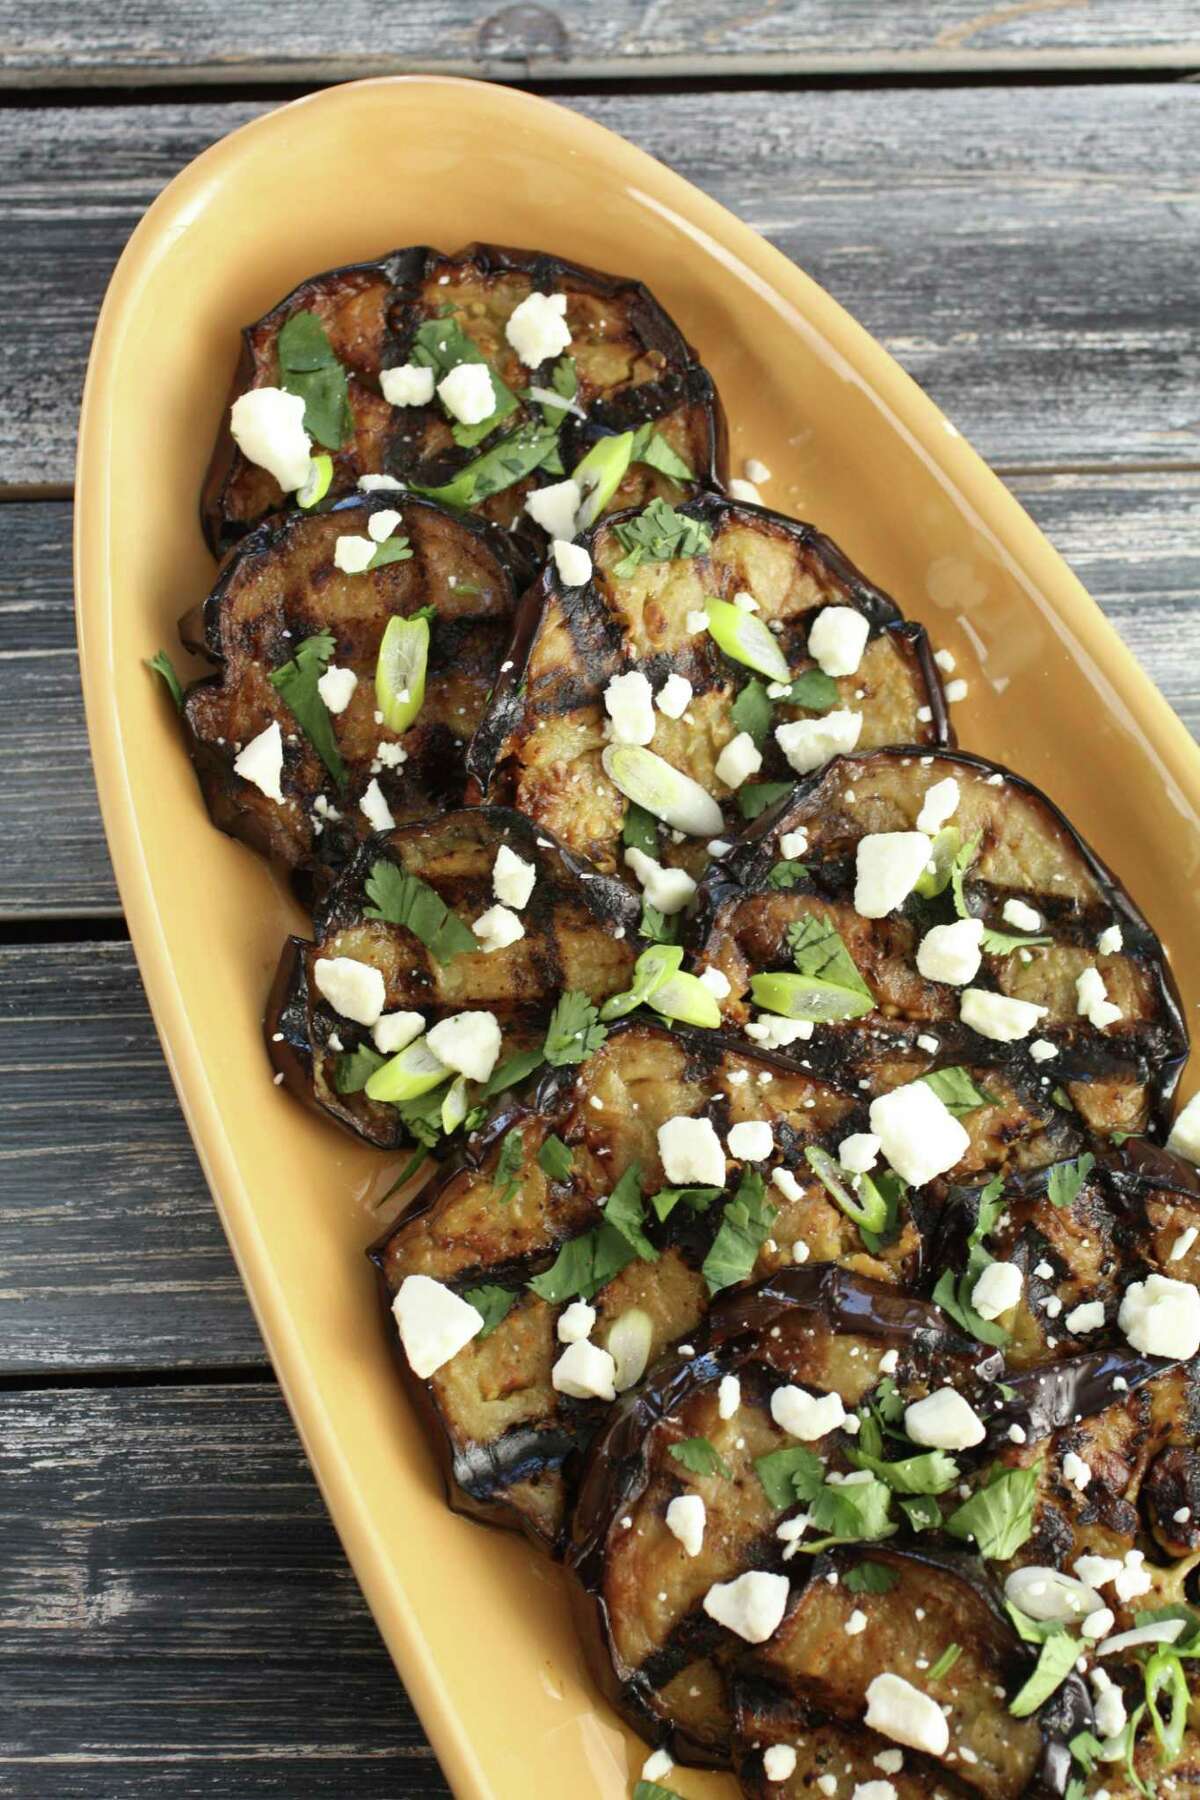 Above, Grilled Eggplant with Minas Cheese and Cilantro, and “Healthy Brigadieros” from Leciaia Moreinos Schwartz’s “Latin Superfoods” cookbook.